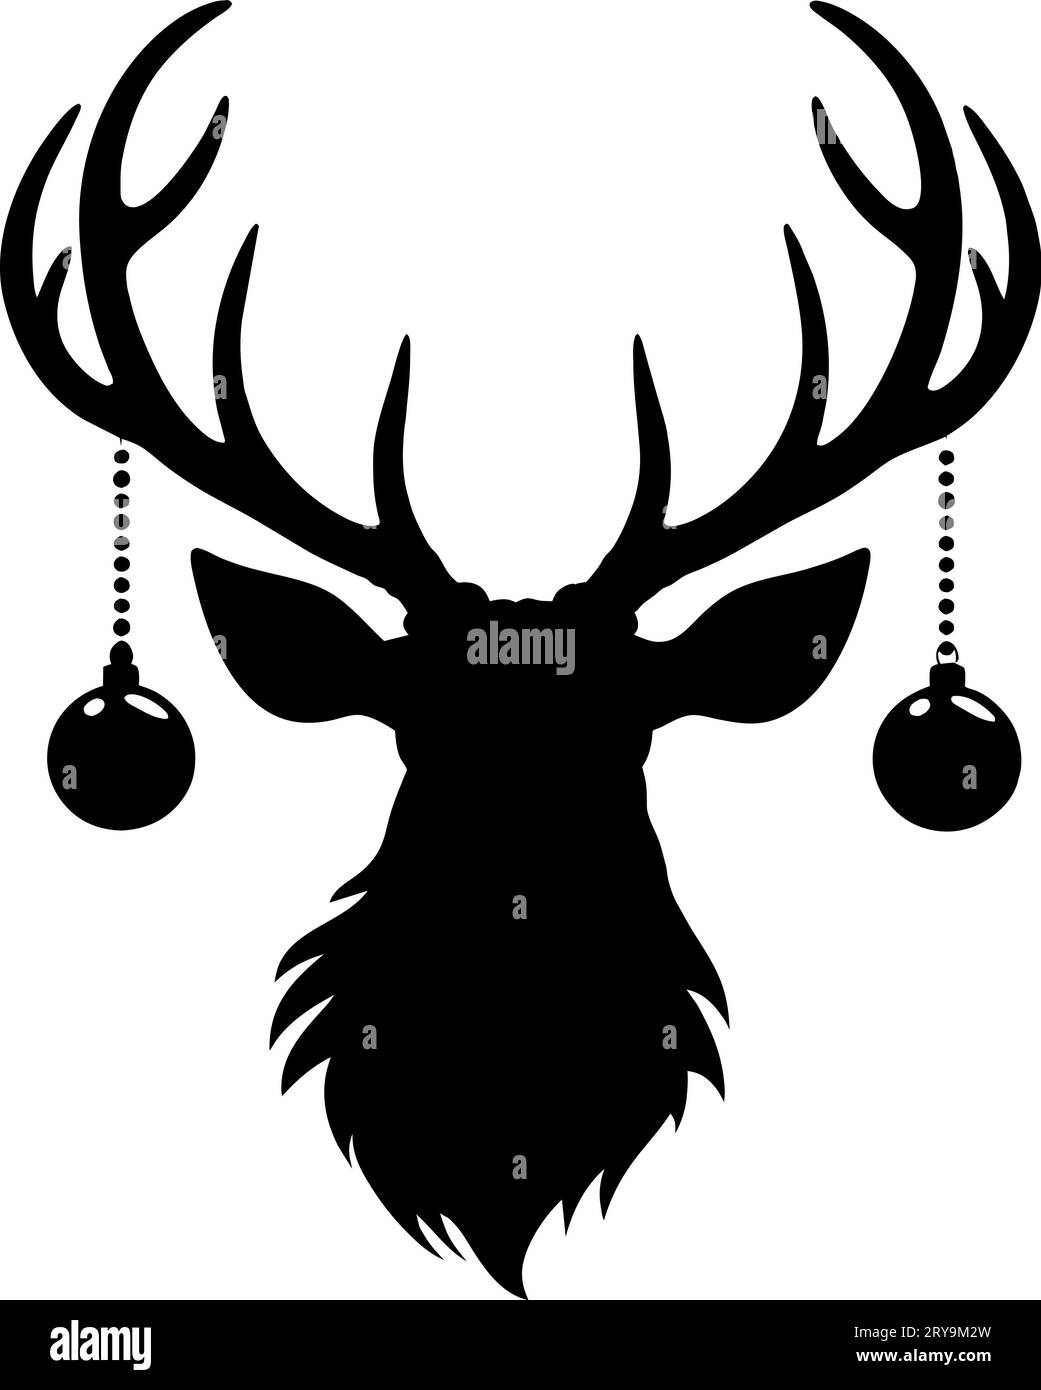 Black silhouette of deer head with antlers and with christmas tree toy balls on horns. vector flat icon isolated on white background Stock Vector